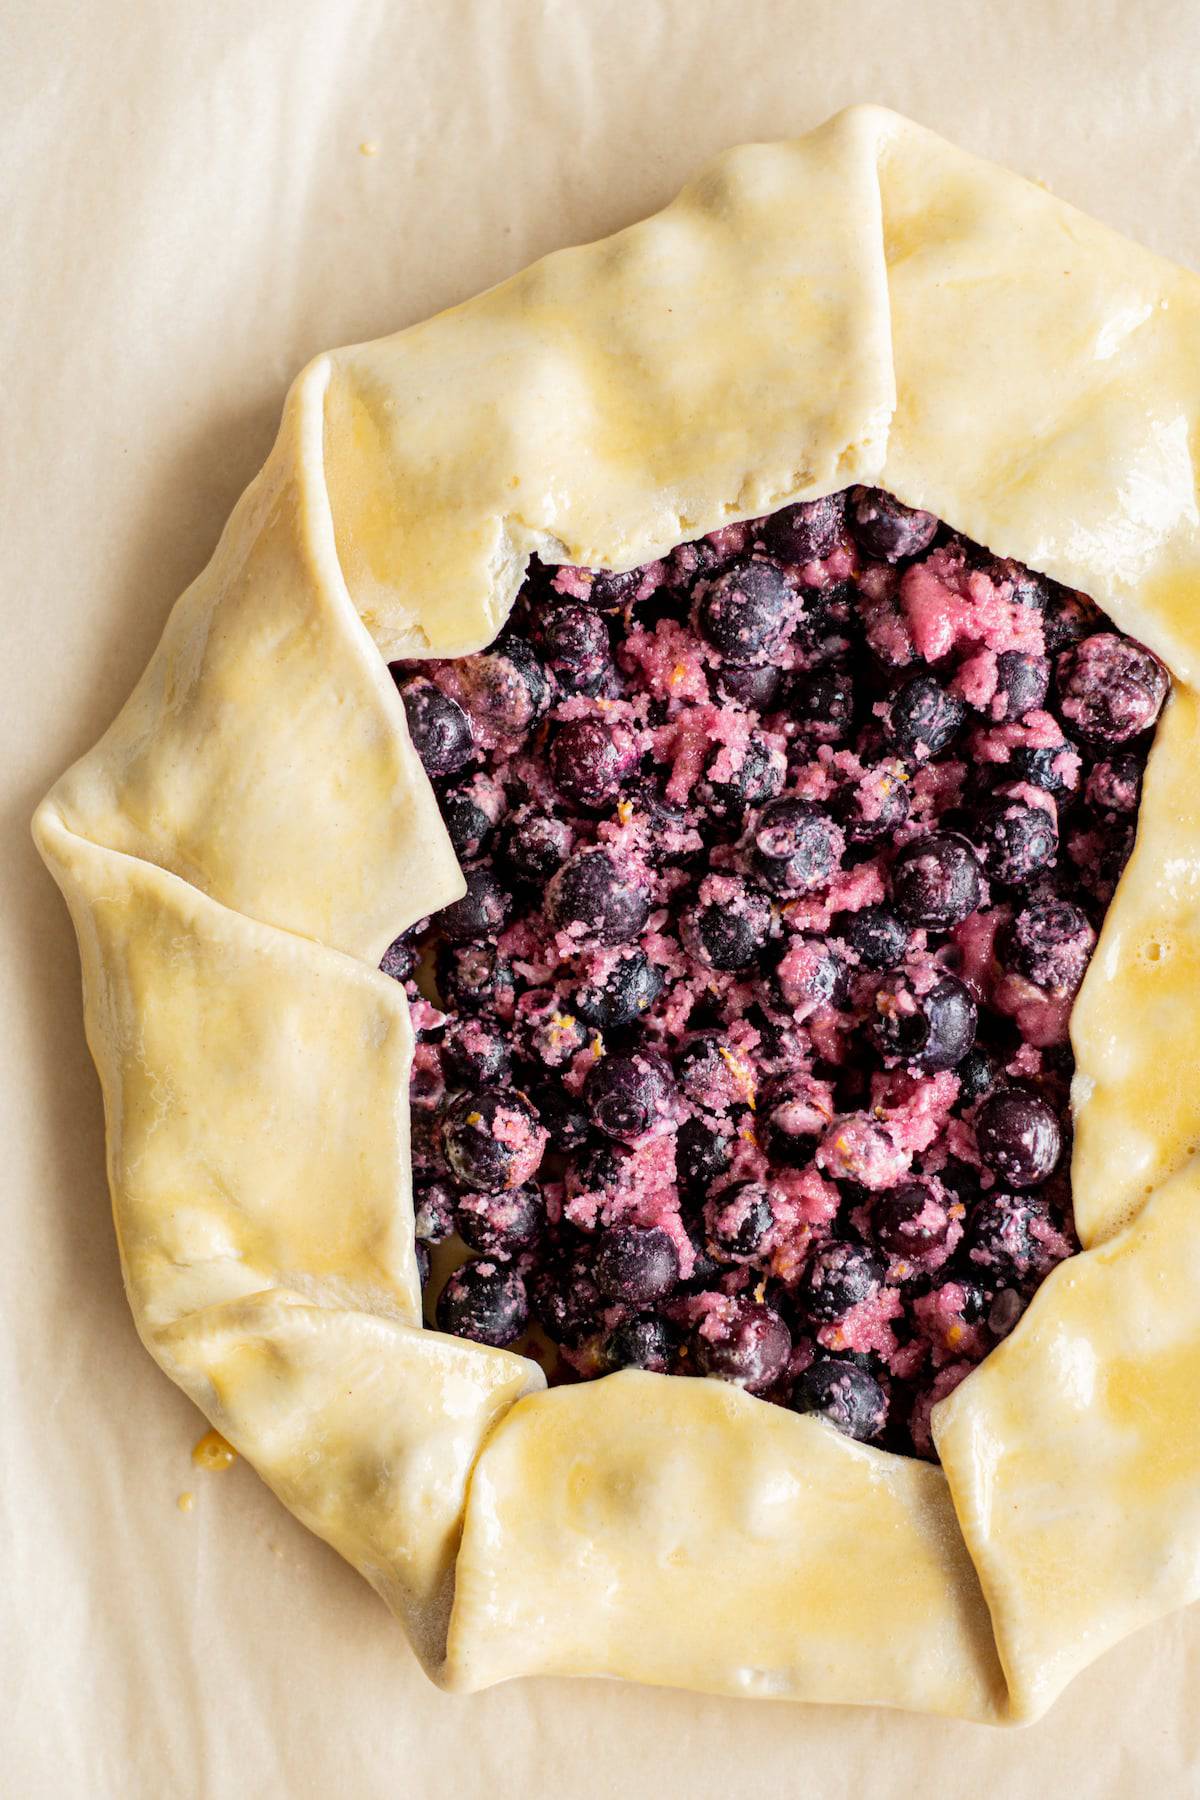 unbaked galette with blueberries.